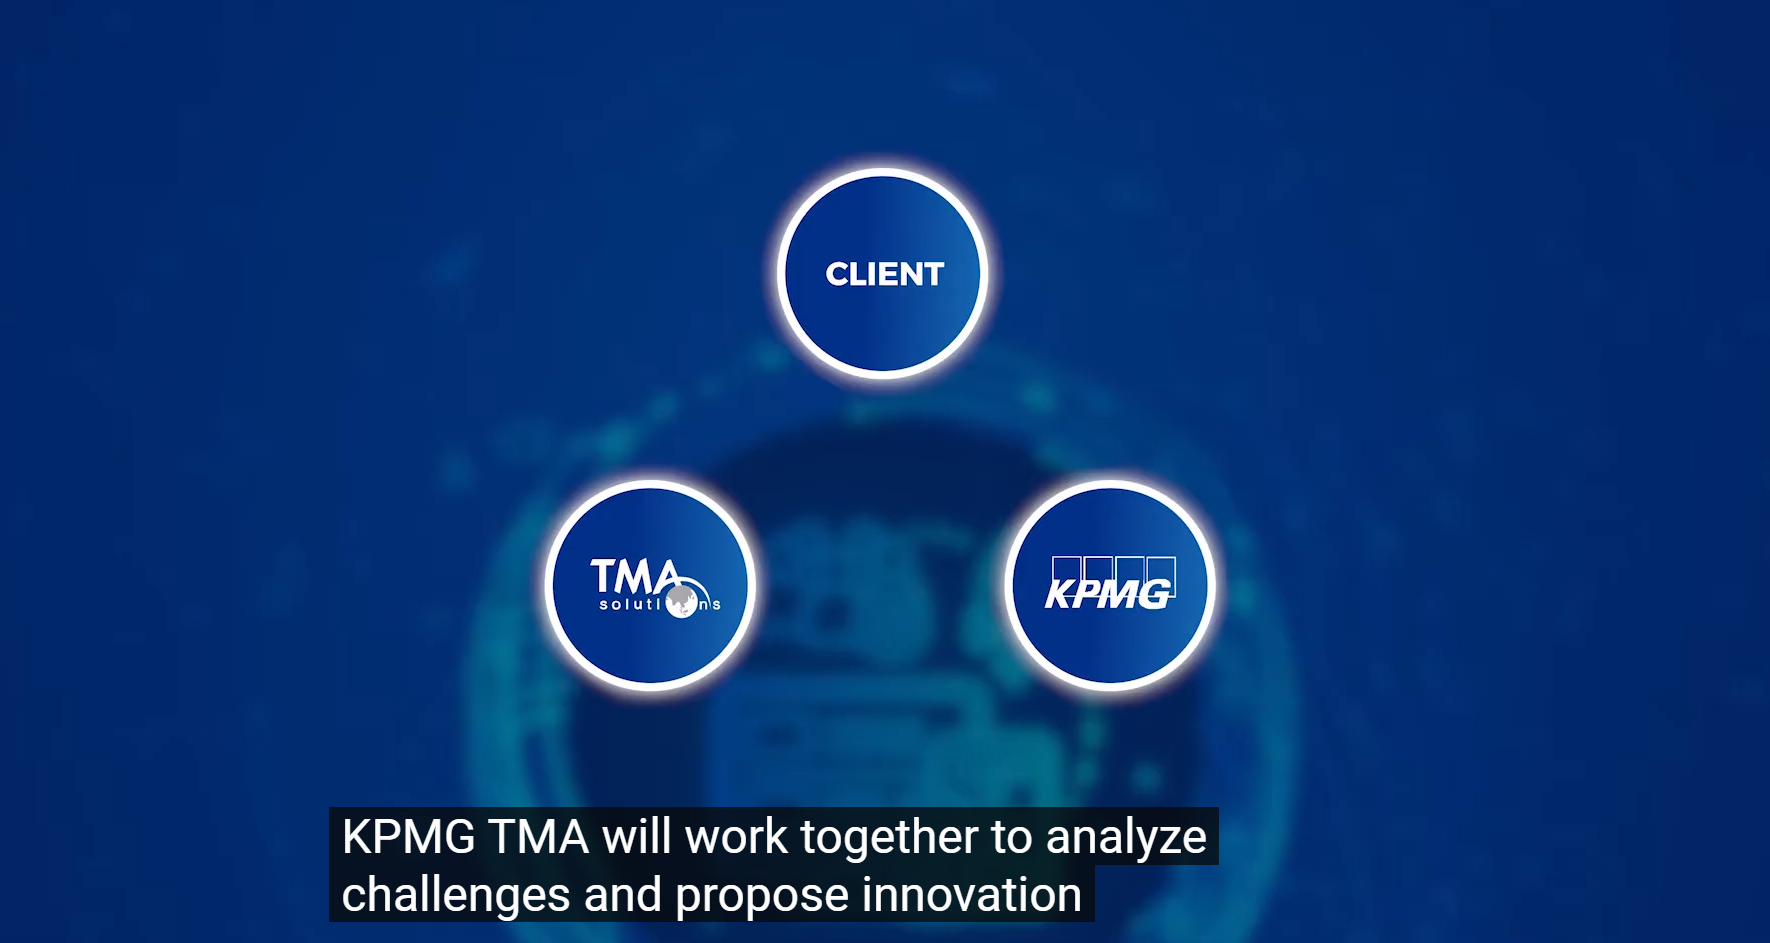 TMA Solutions and KPMG - Launching Innovation as a Service for the first time in Vietnam